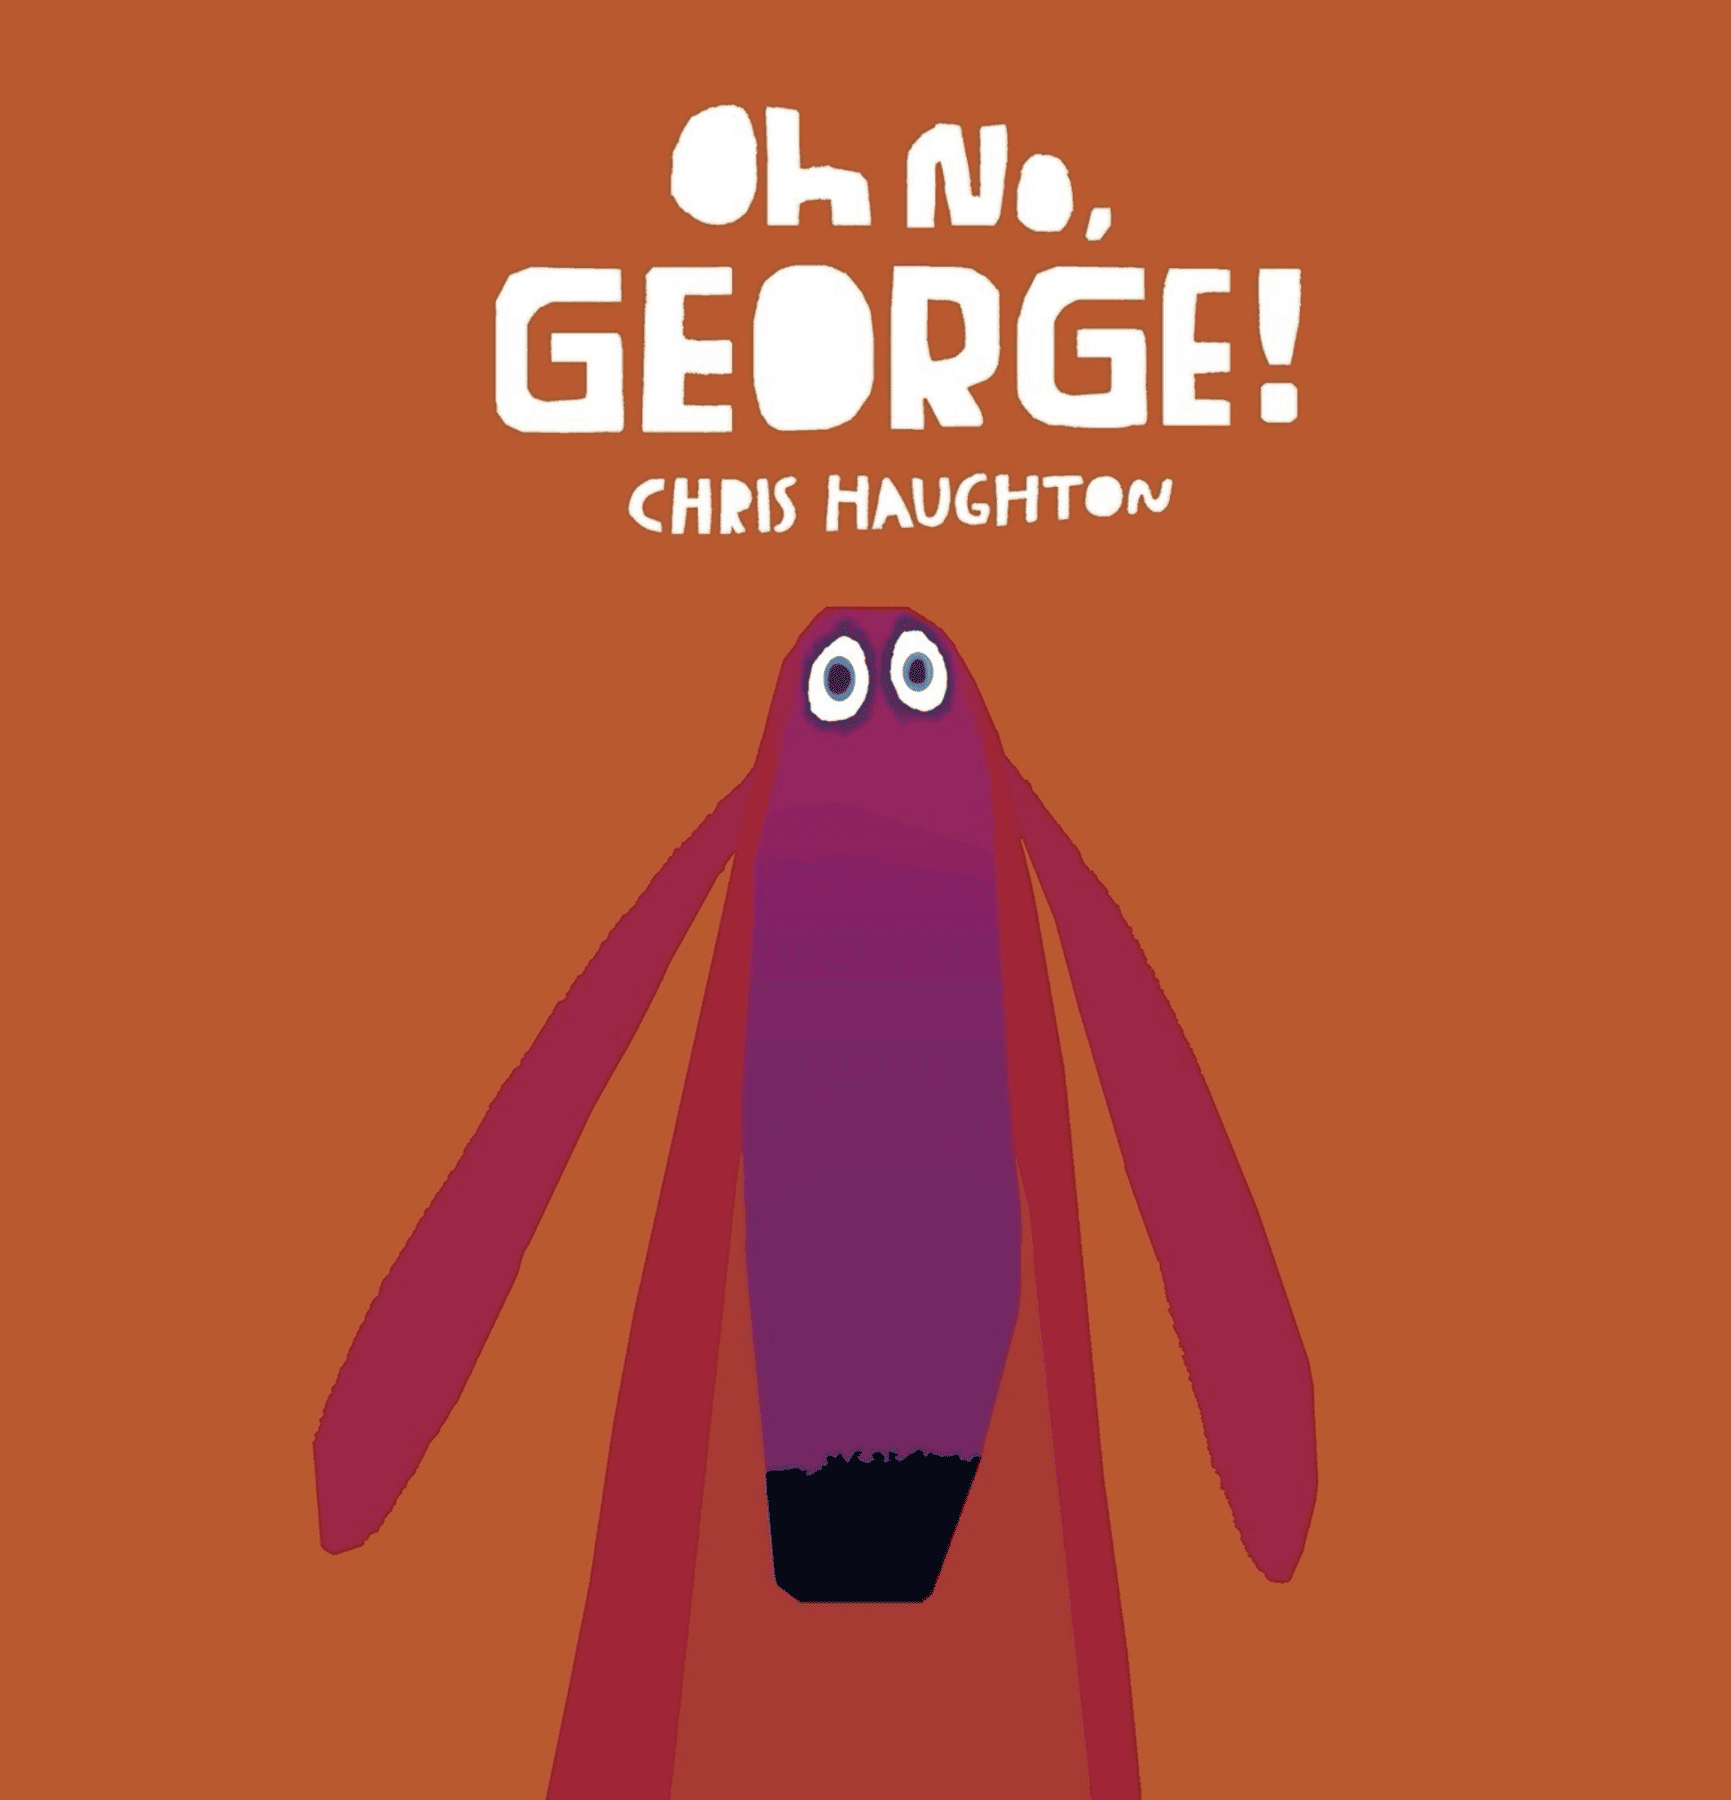 Cover of Oh No, George, by Chris Haughton, depicting a guilty, dismayed-looking red, orange, and purple dog with long ears and a long snout.